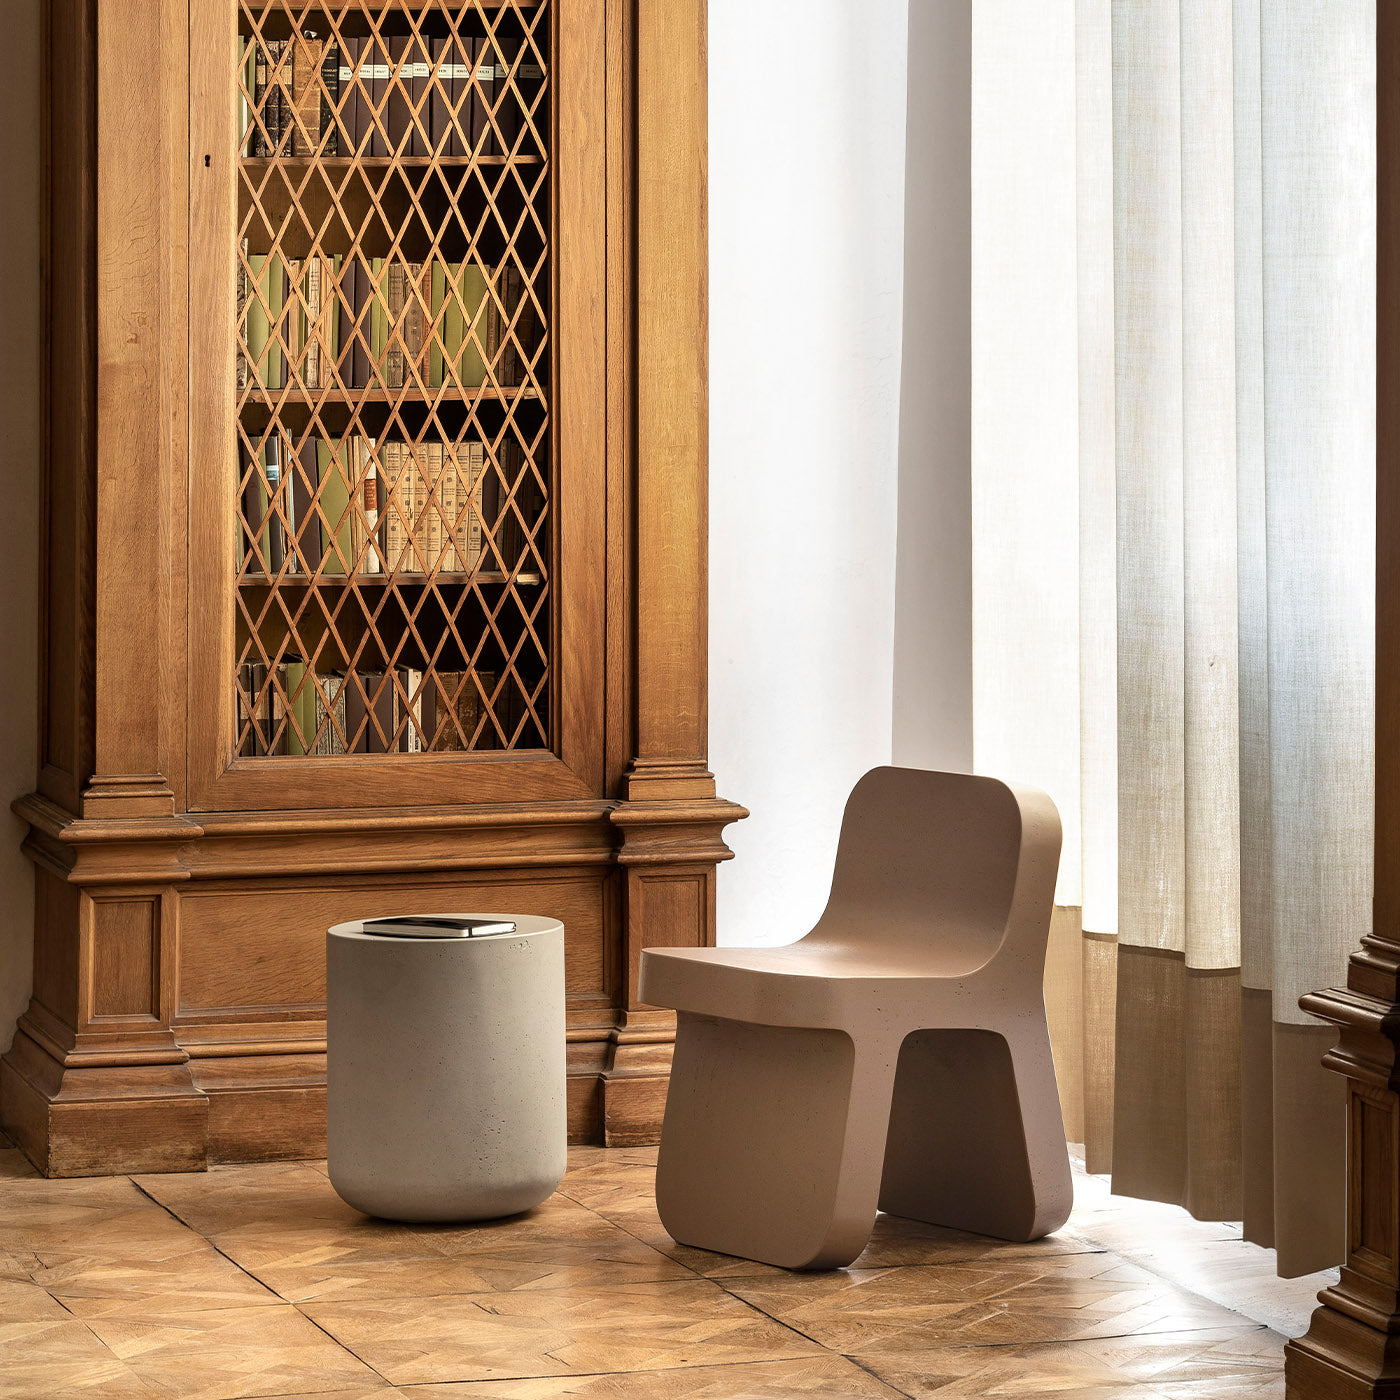 Torcello Chair by Defne Koz and Marco Susani - Alternative view 1